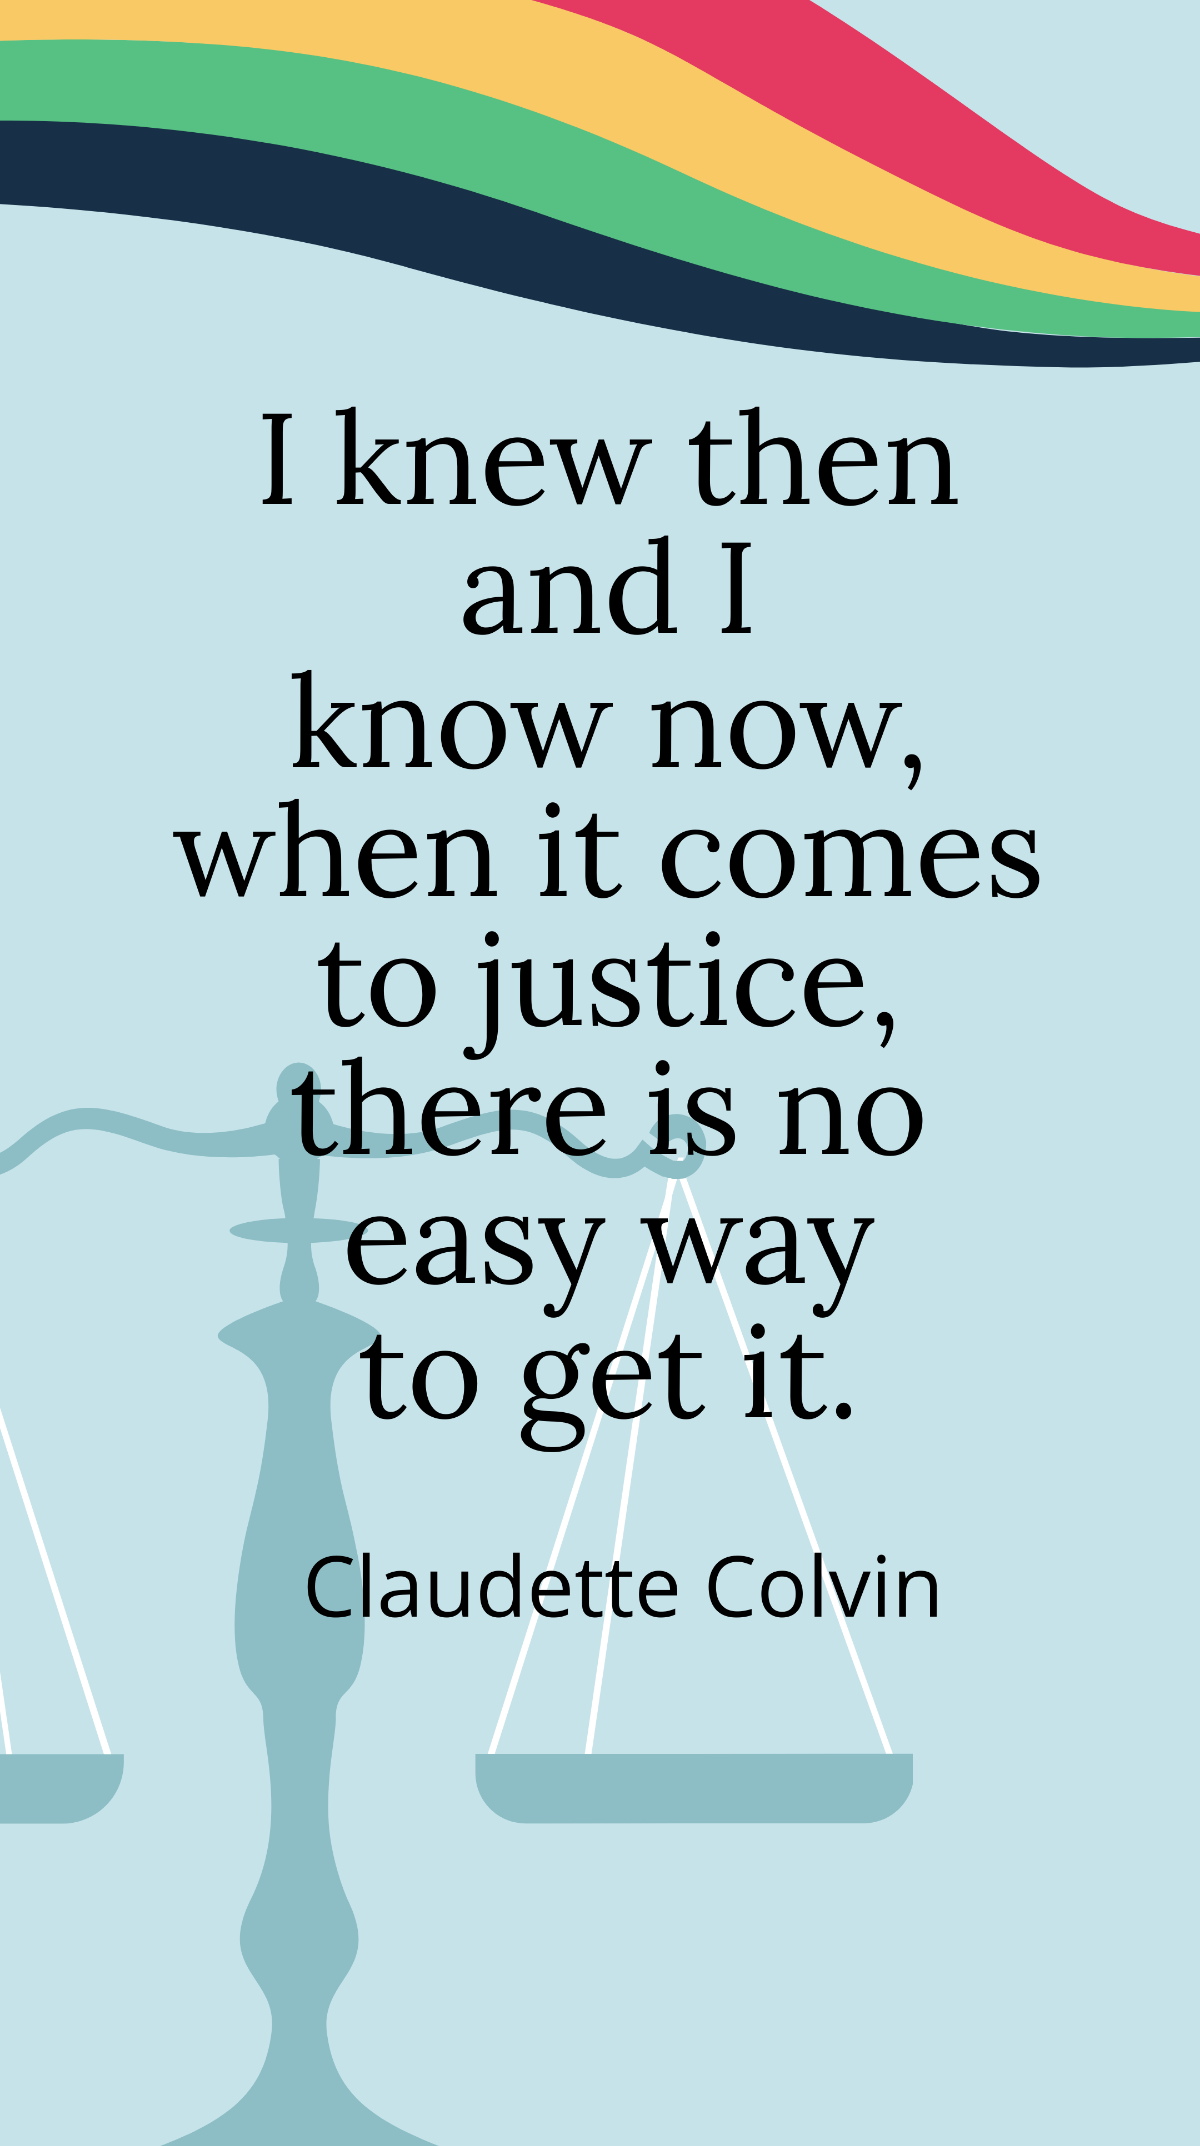 Claudette Colvin - I knew then and I know now, when it comes to justice, there is no easy way to get it. Template